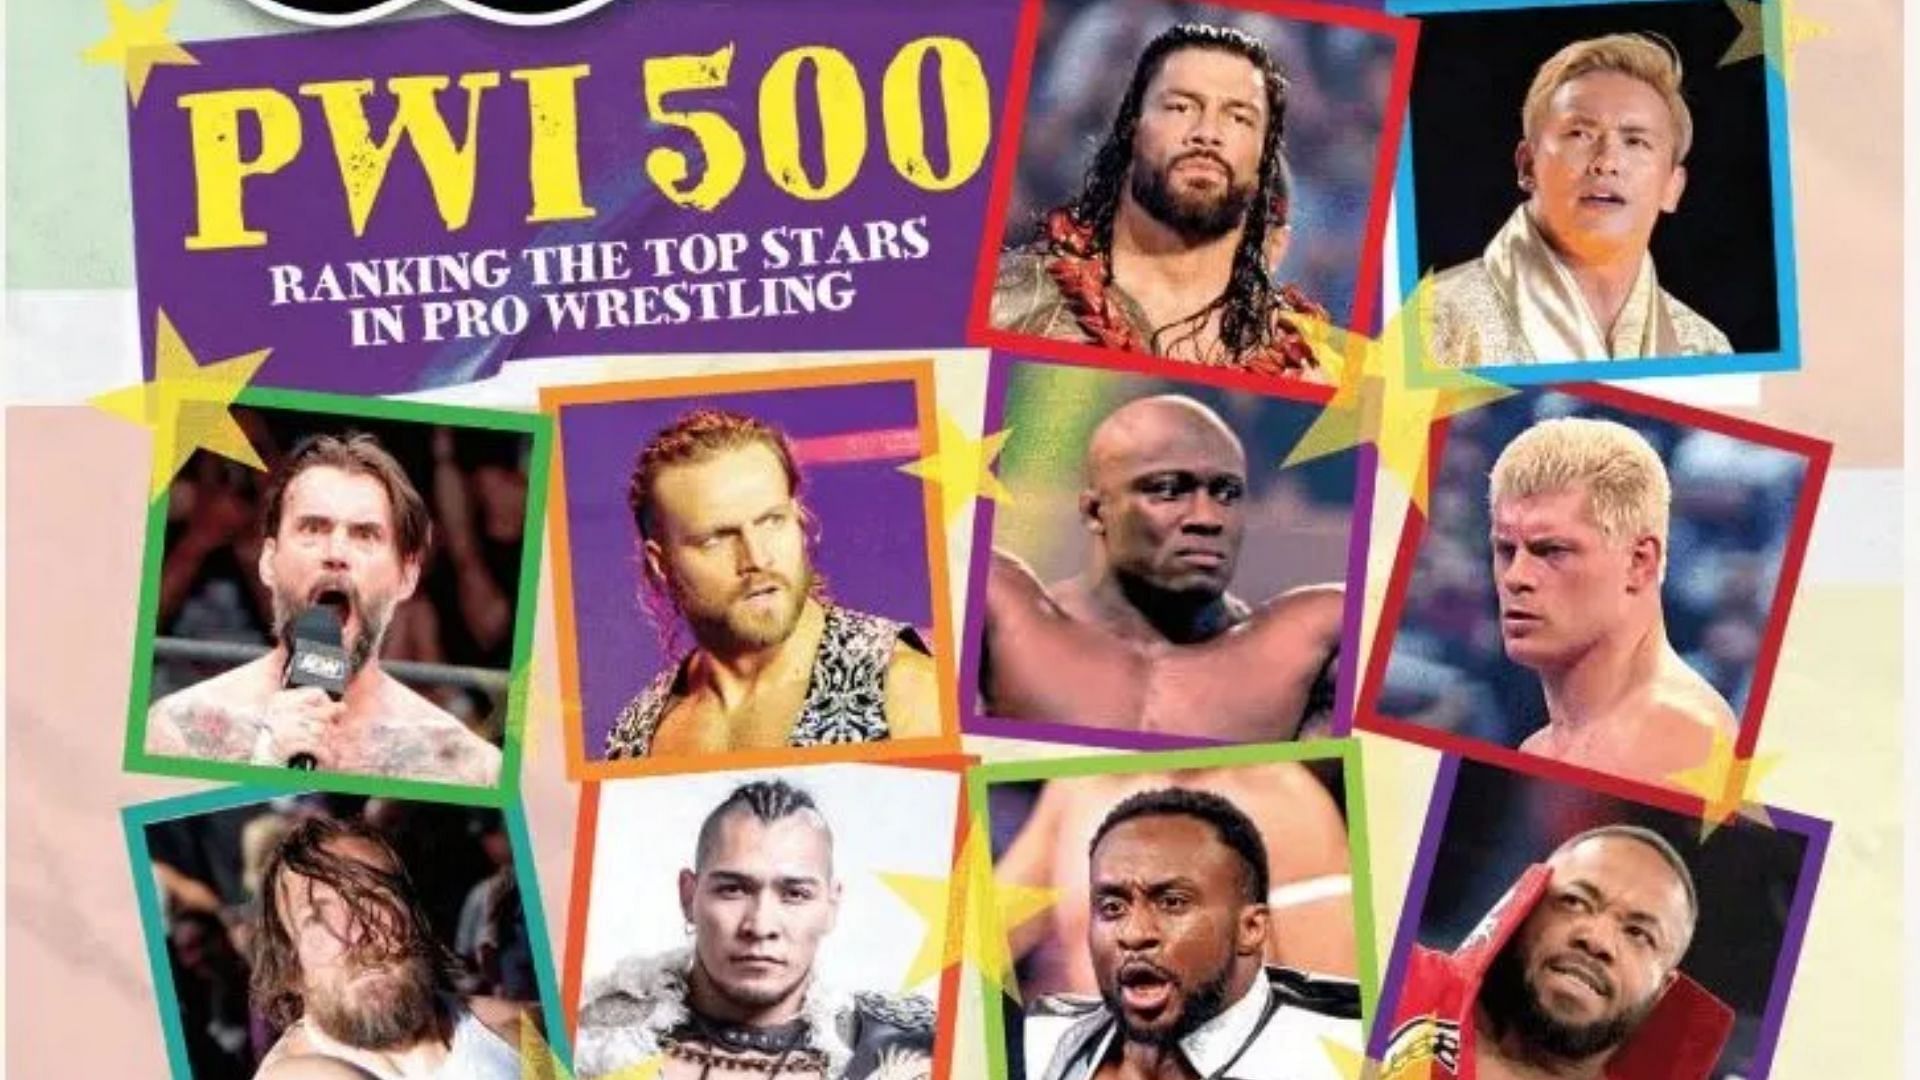 Four WWE Superstars made it to the PWI500 Top 10